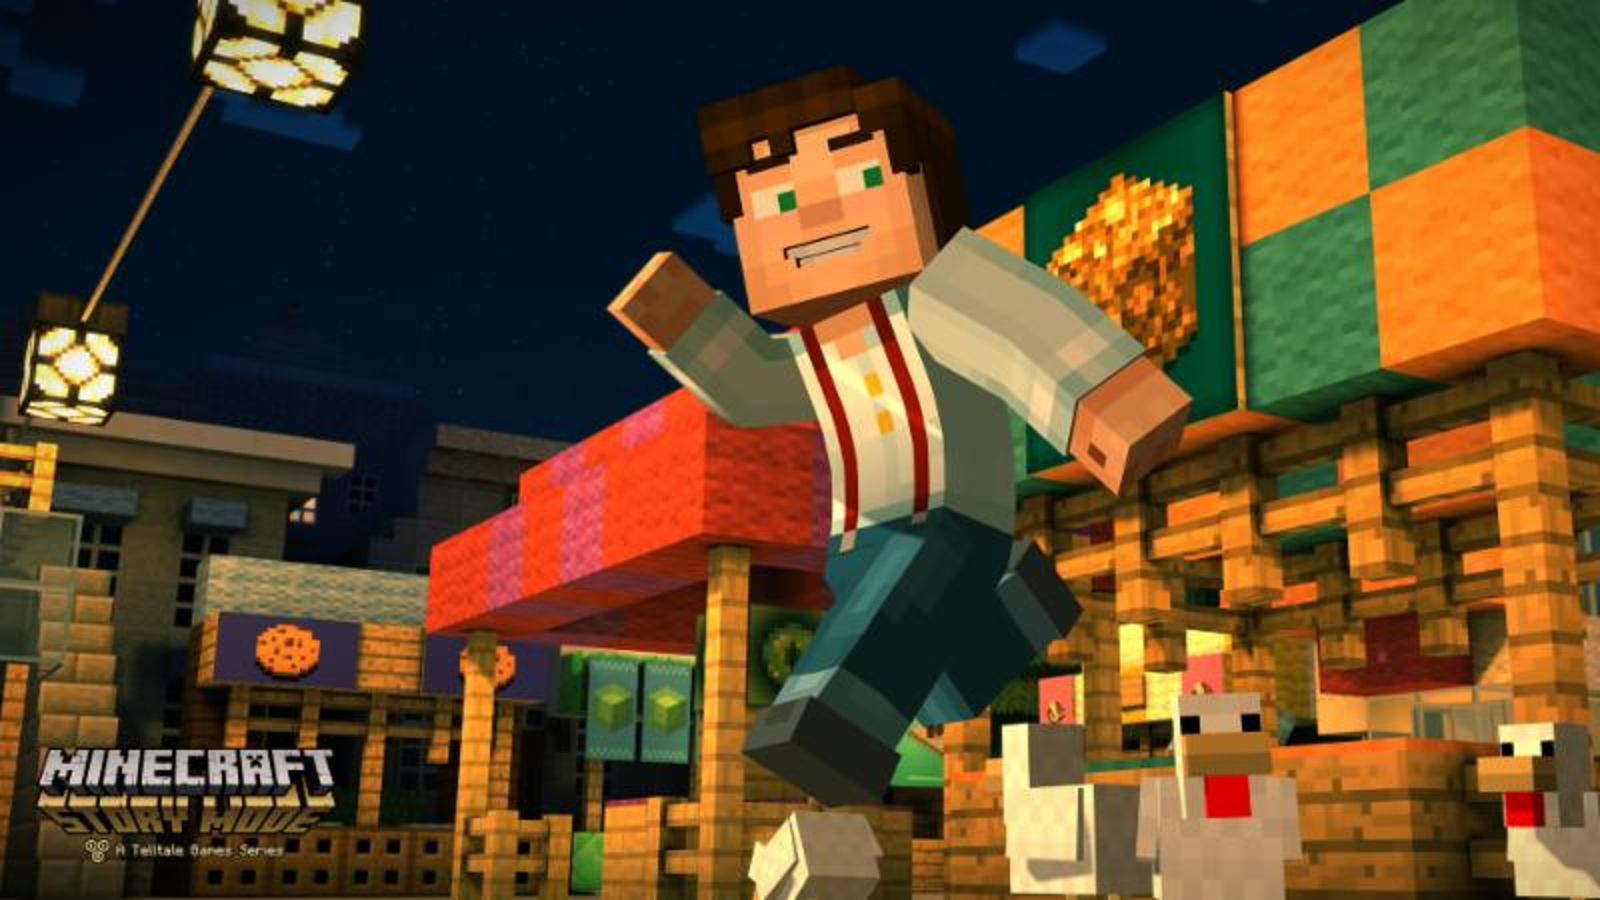 Buy Minecraft Story Mode Season Two PS4 Game Code Compare Prices